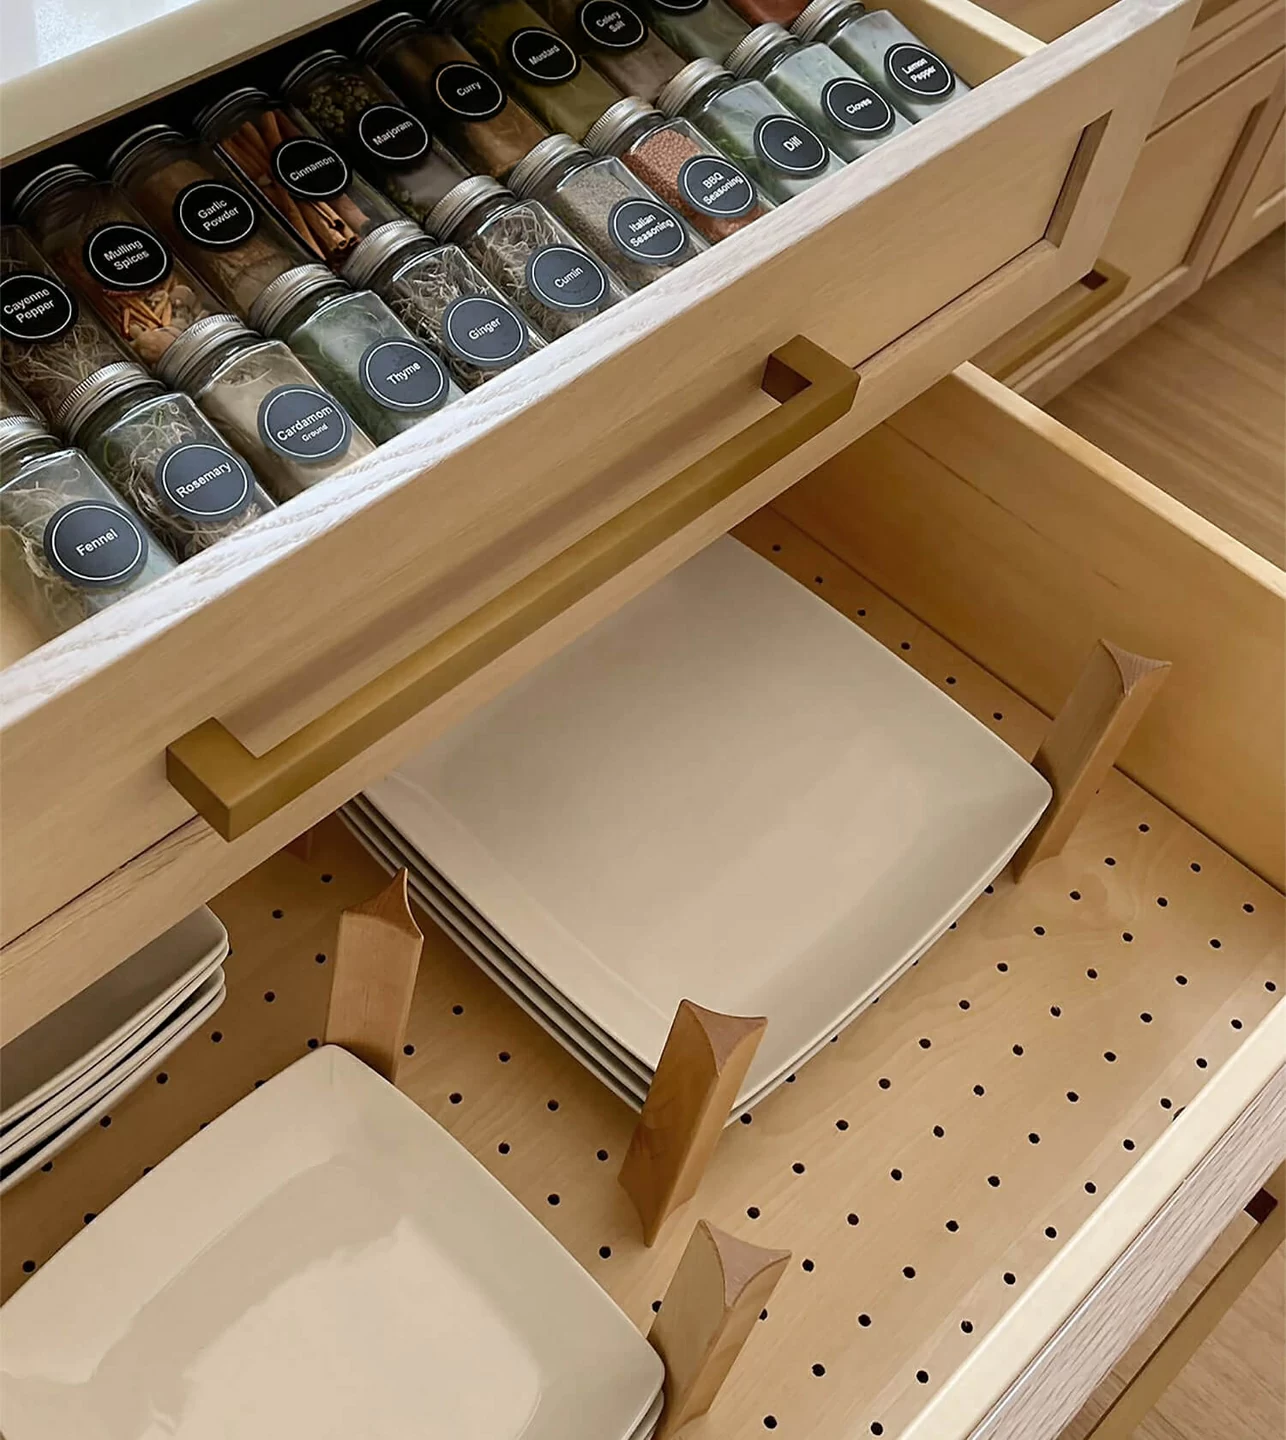 A wide drawer with a spice rack drawer above a deep kitchen drawer with a peg system organizer for plate and bowl storage.